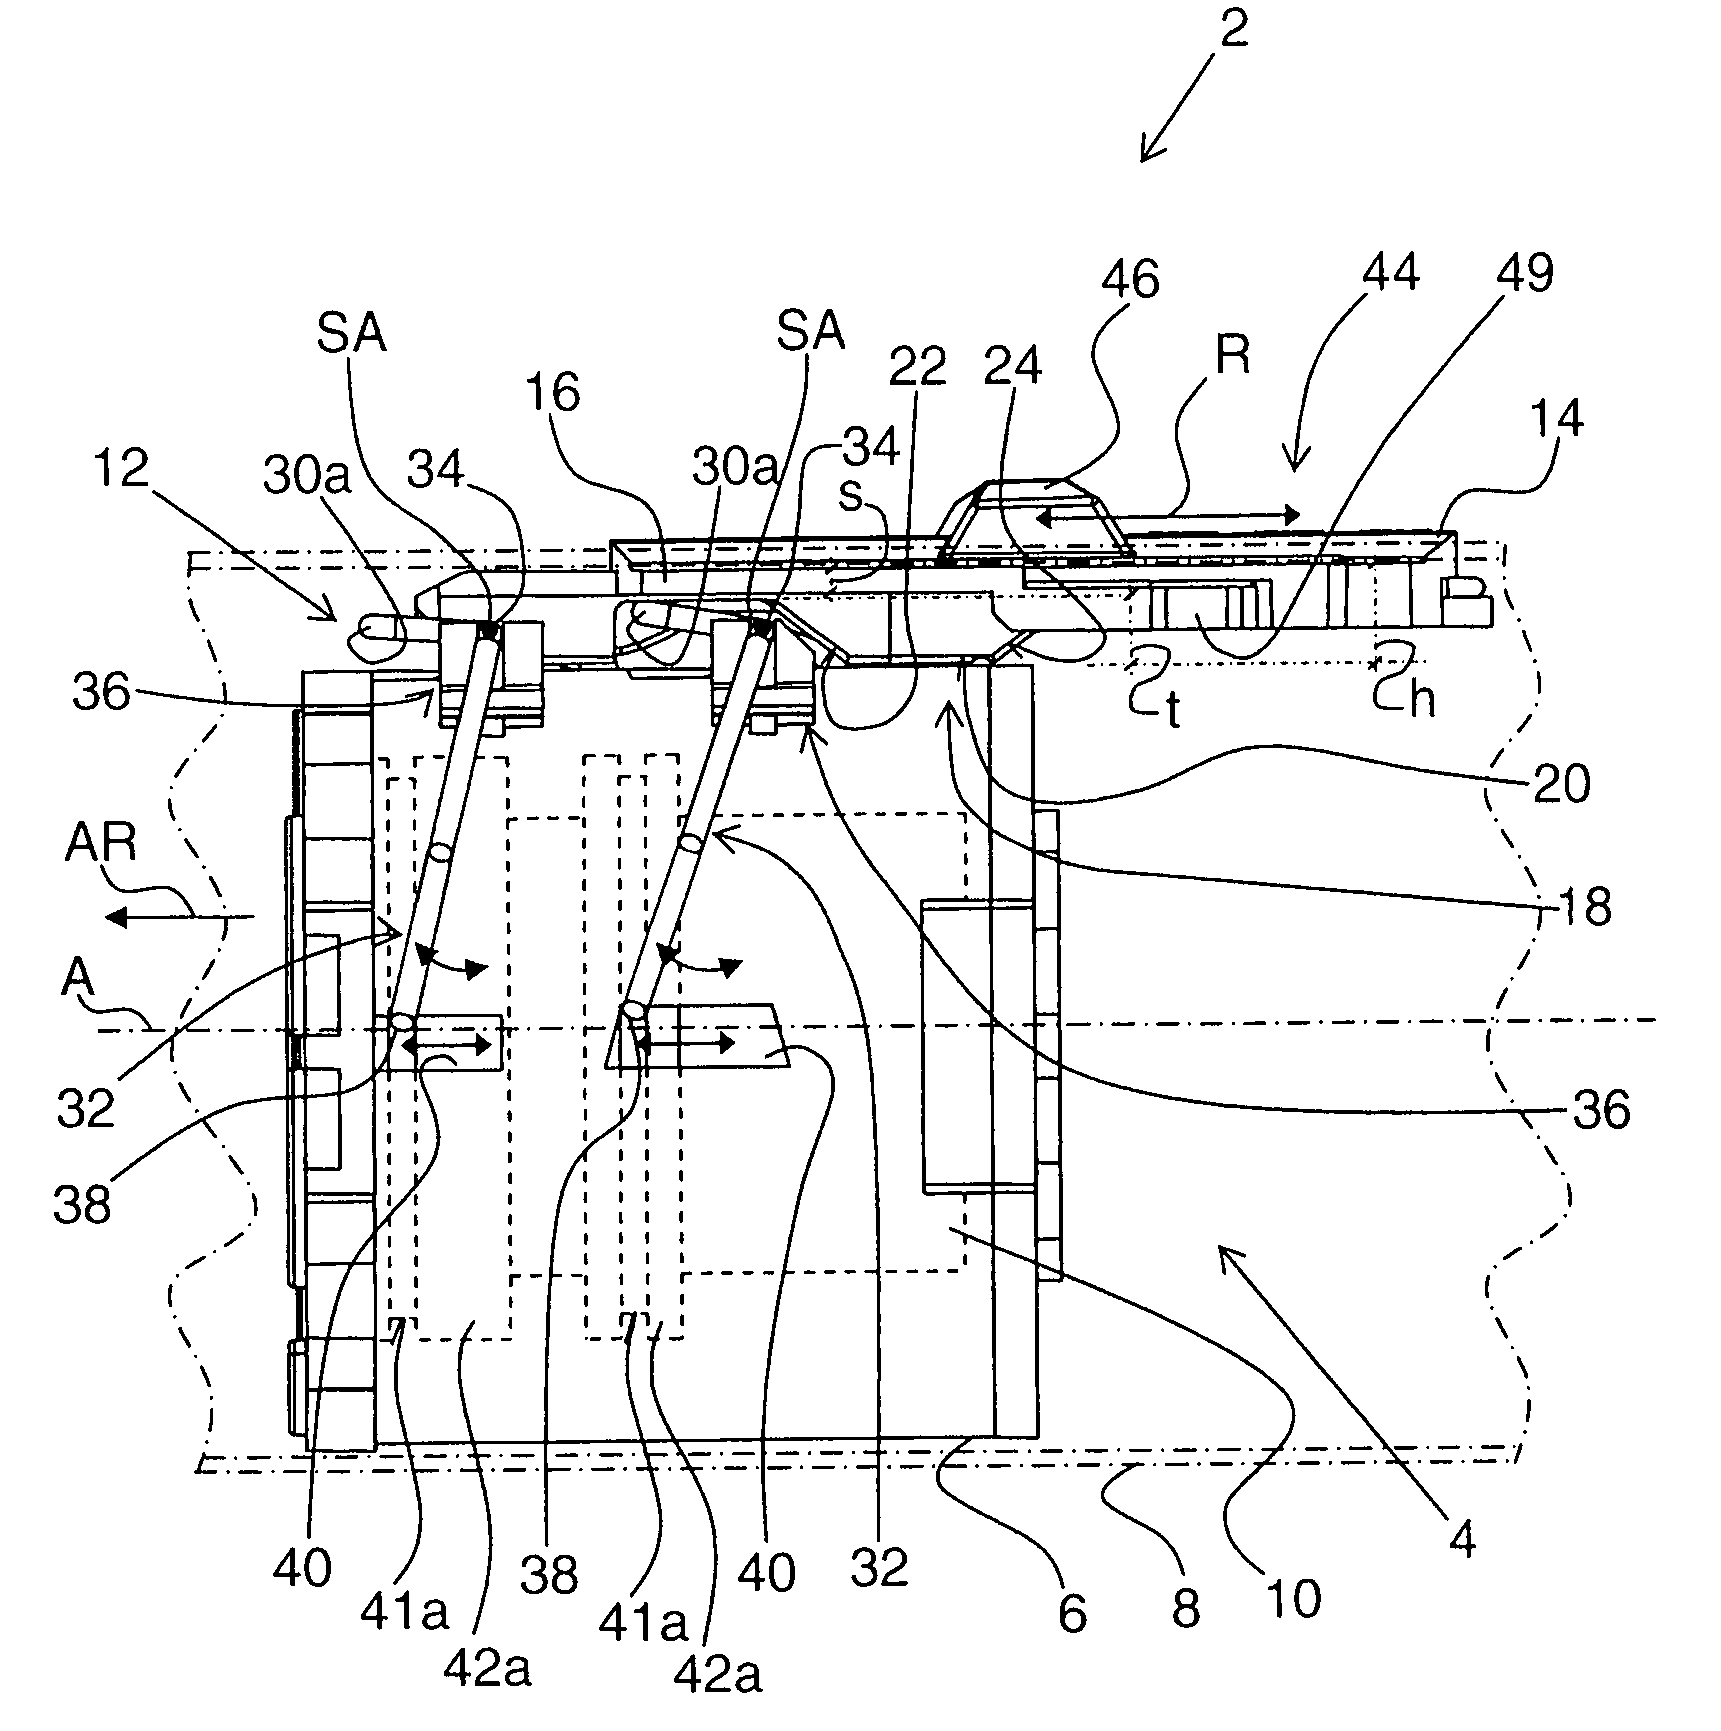 Electrical tool with a multi-stage gear transmission